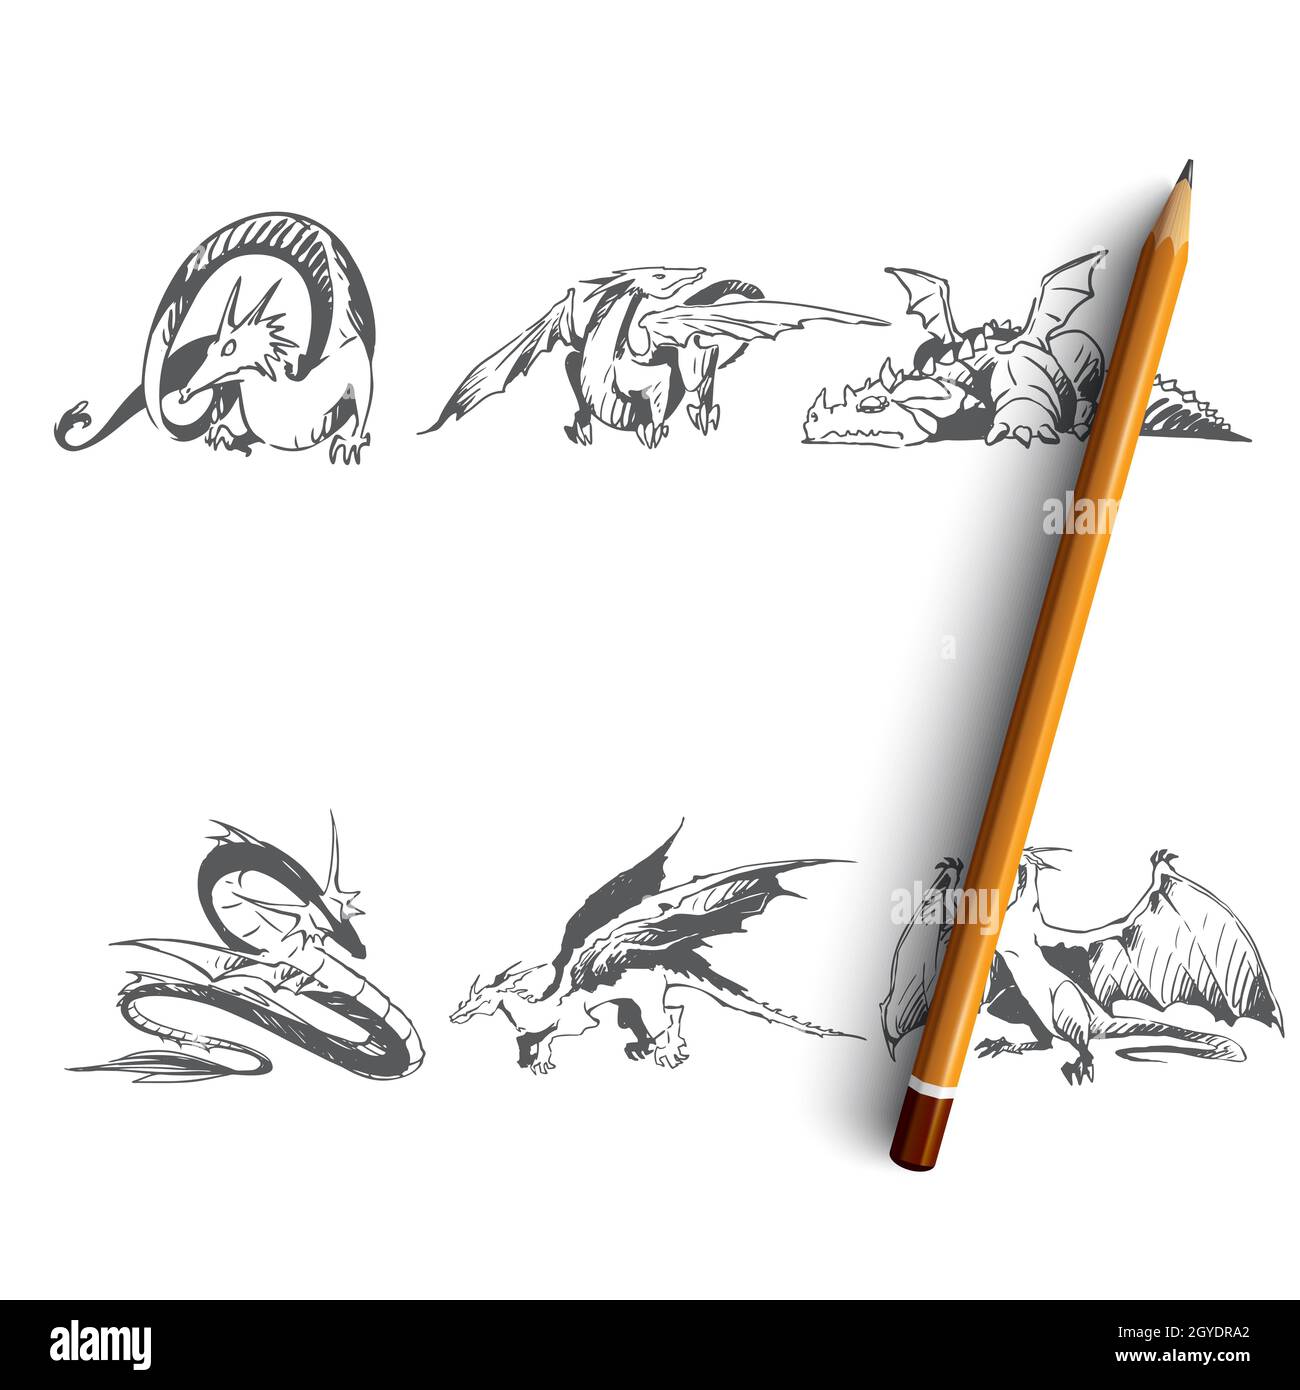 Dragons - different types of dragons vector concept set. Hand drawn sketch isolated illustration Stock Photo